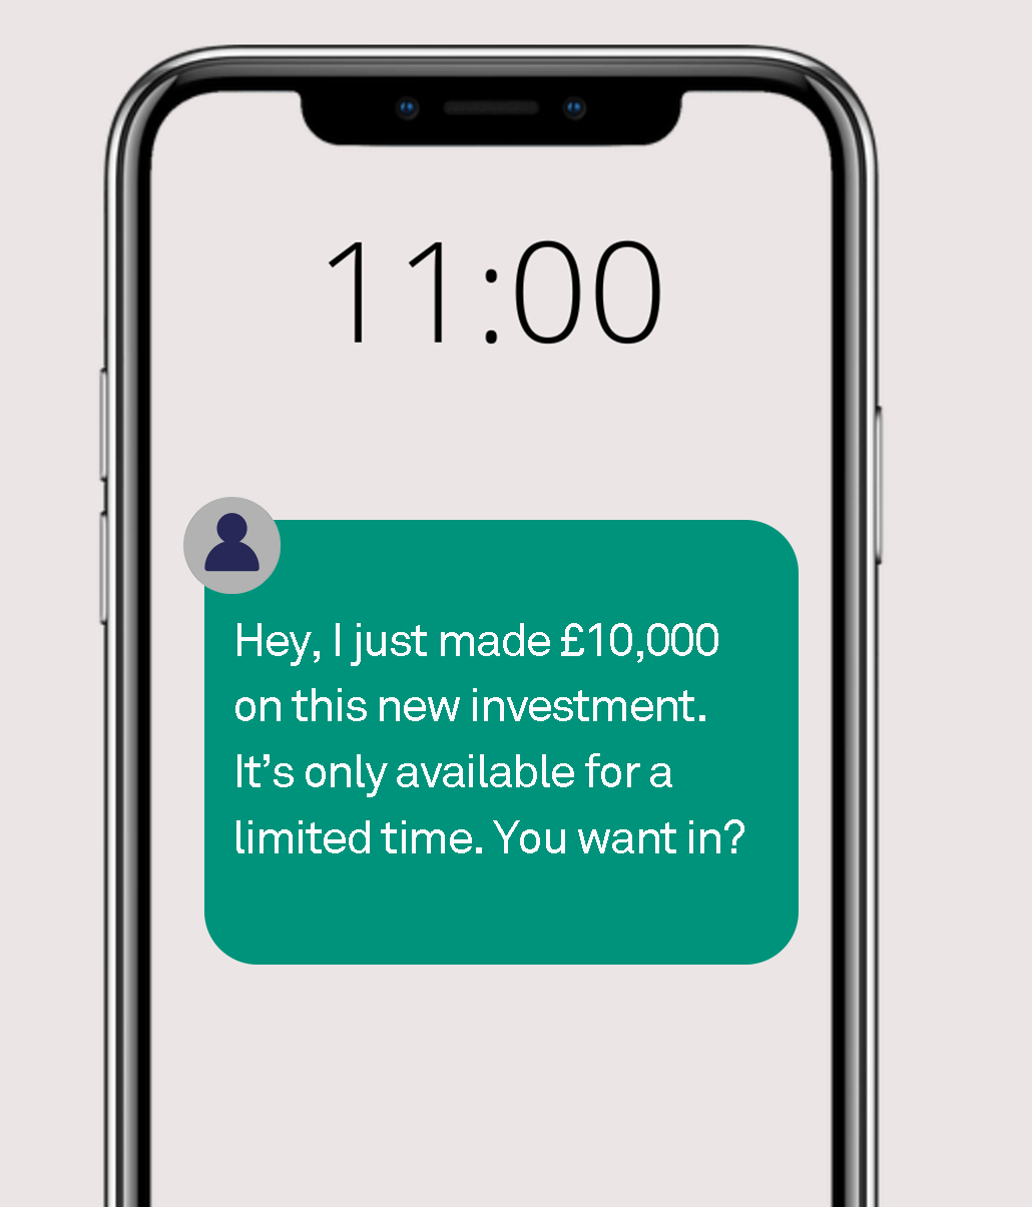 Image of smartphone with message saying "Hey, I just made £10,000 on this new investment. It's only available for a limited time. You want in?